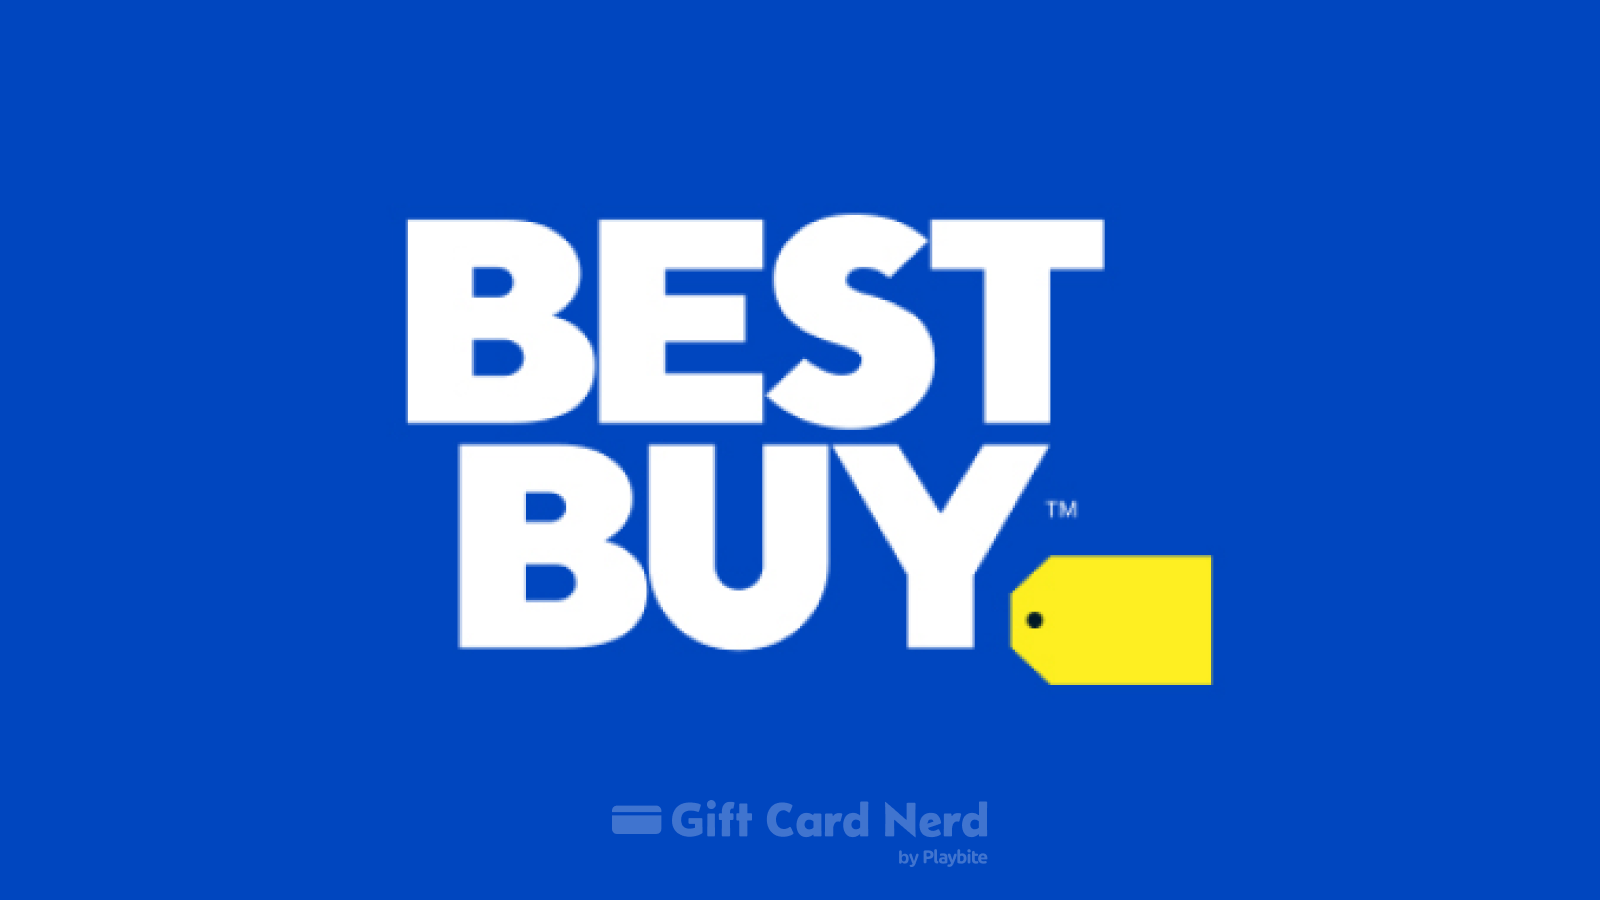 Can You Buy Best Buy Gift Cards at CVS?